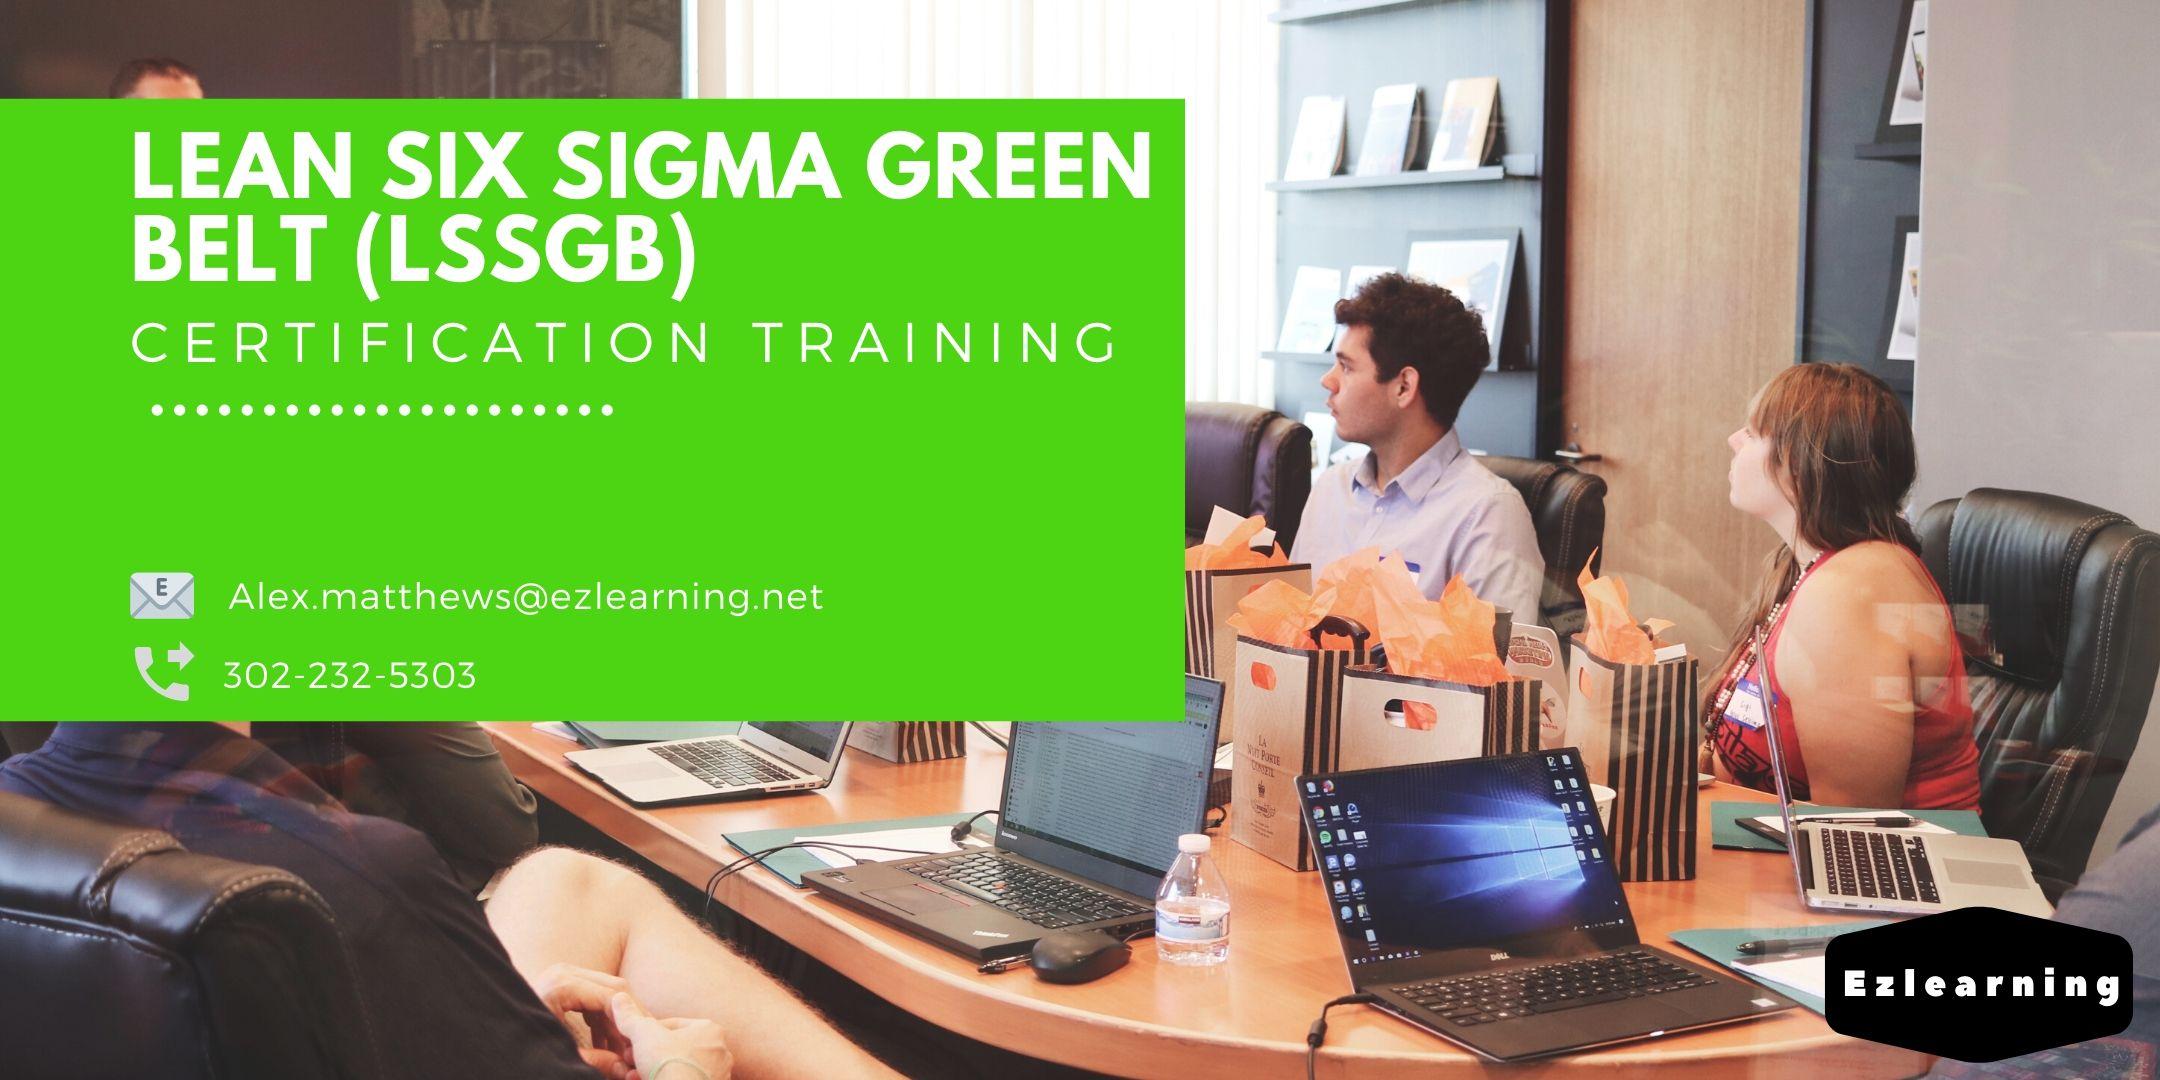 Lean Six Sigma Green Belt Training in Greater Los Angeles Area, CA